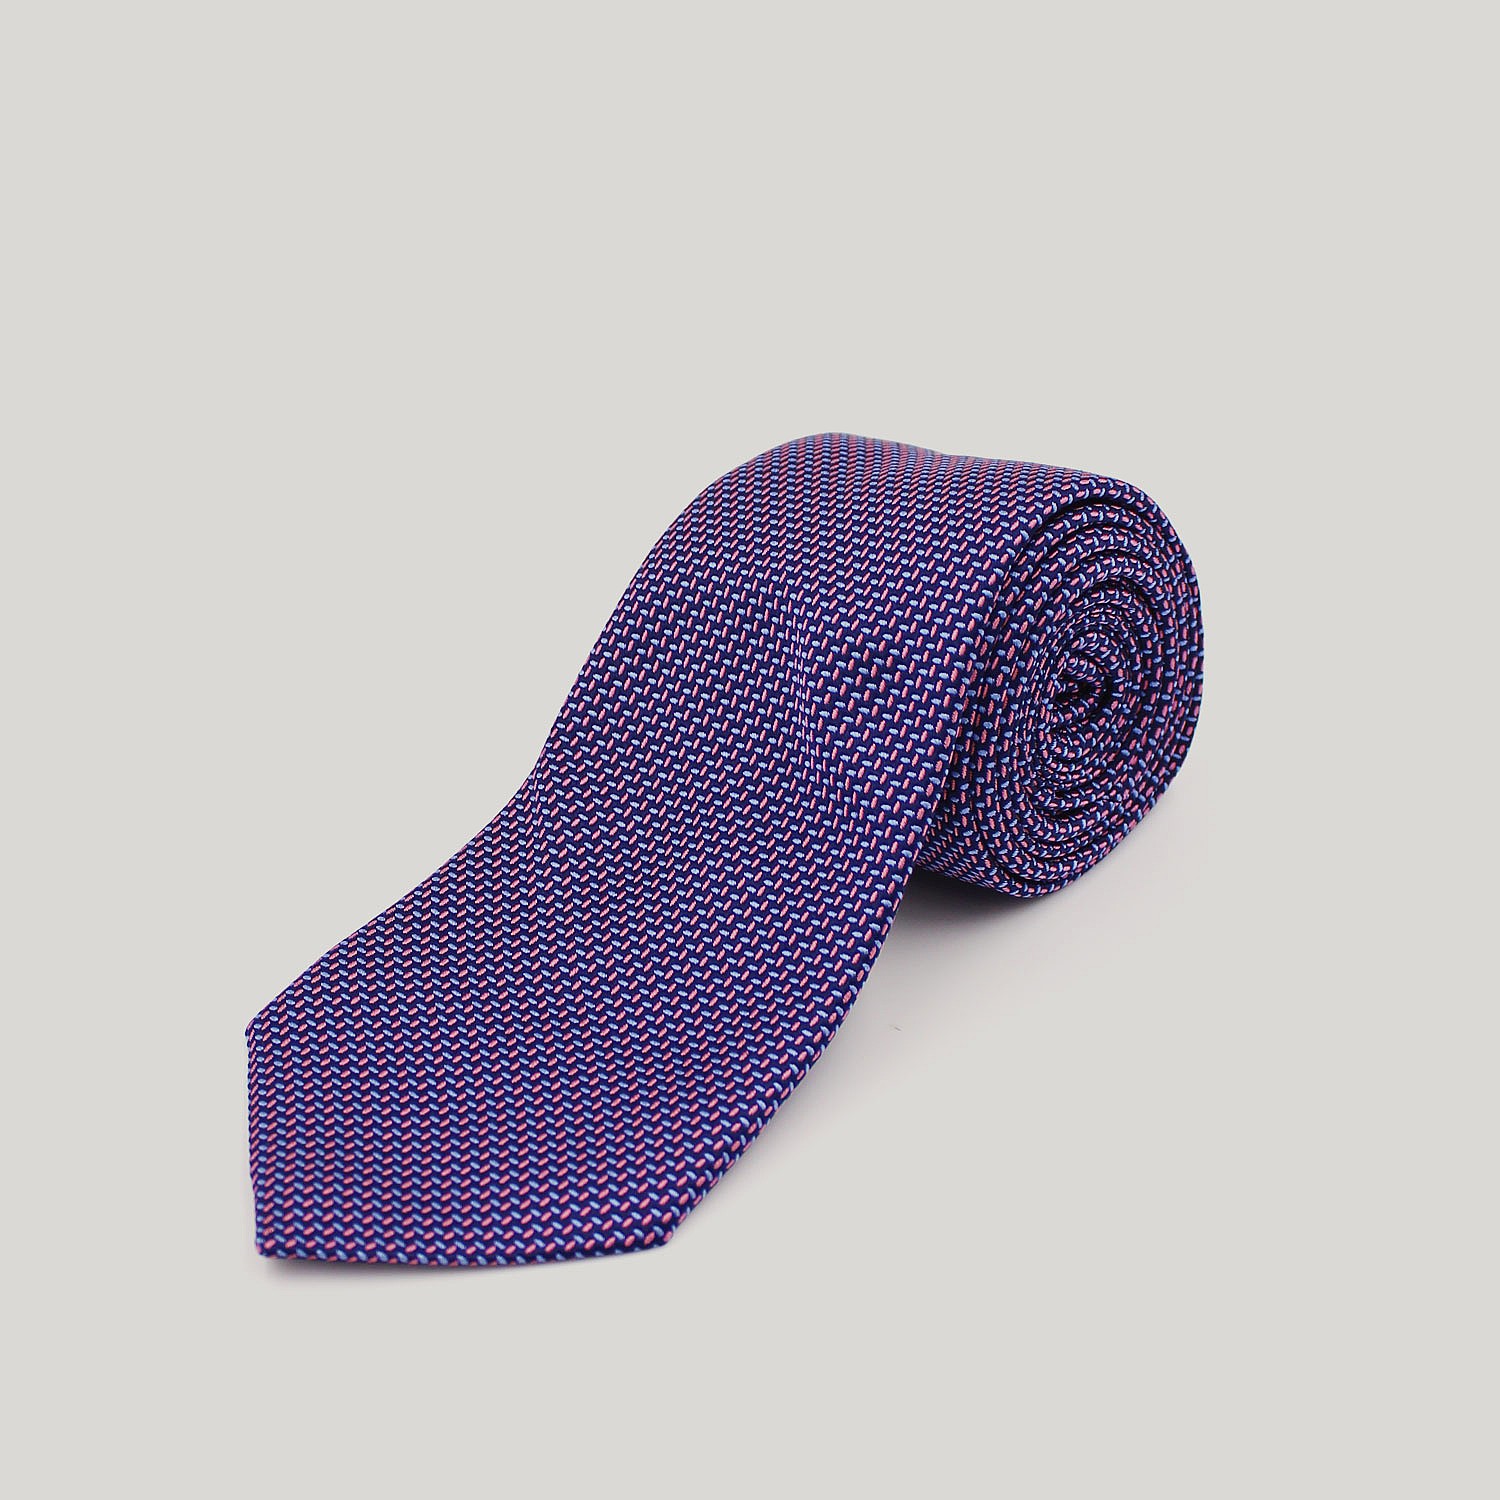 What Your Tie Says About You | Tie Options For Men